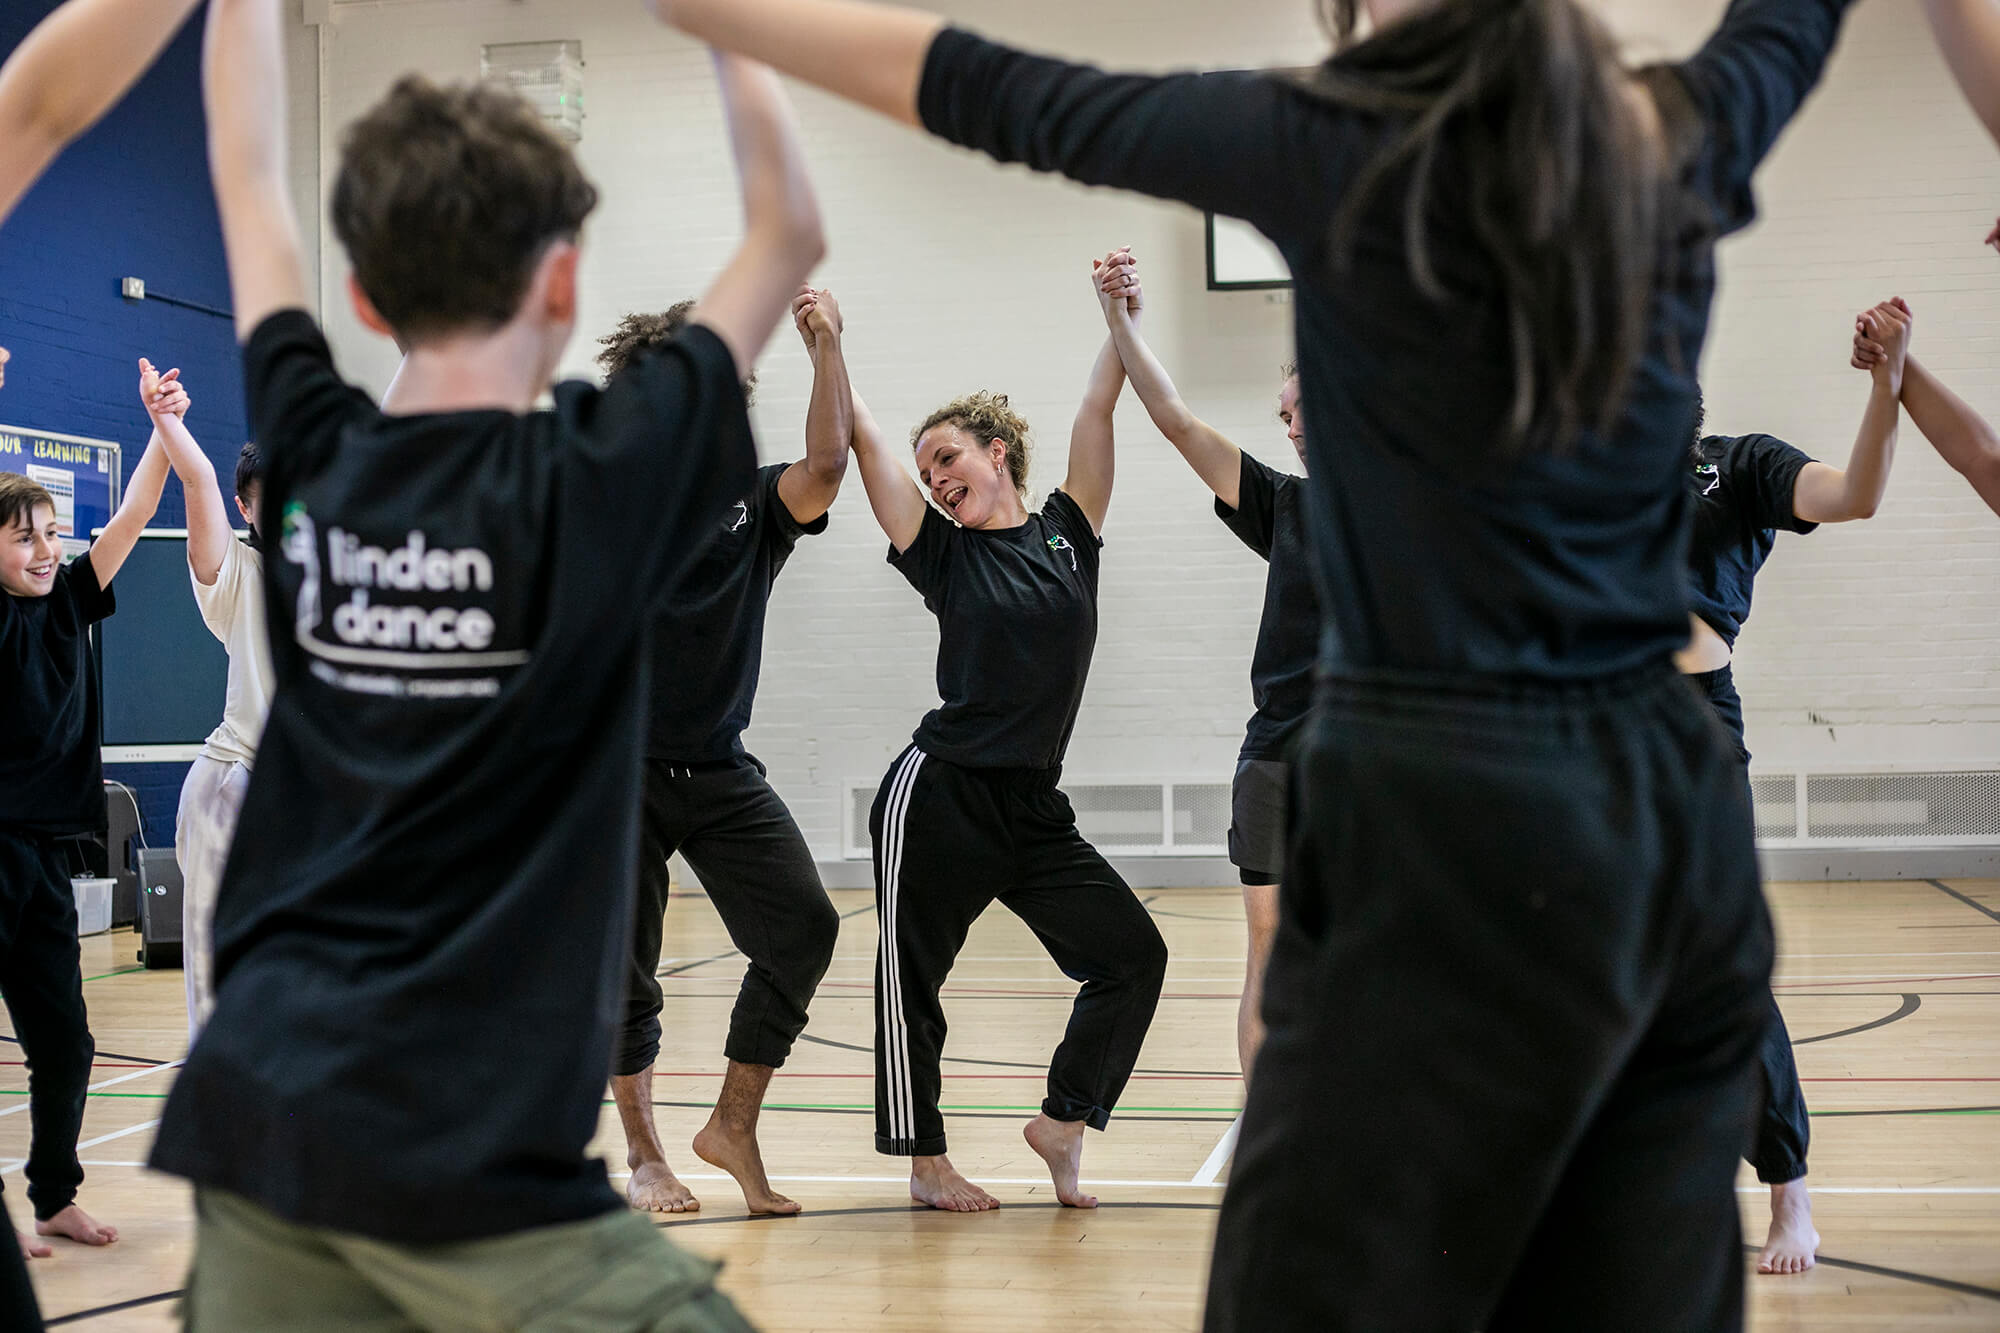 Dance circle with young people holding hands with the joint hands in the air. ca,era focused on the teacher with hip popped to the side and smiling. All wearing black PE kit in a sports hall.